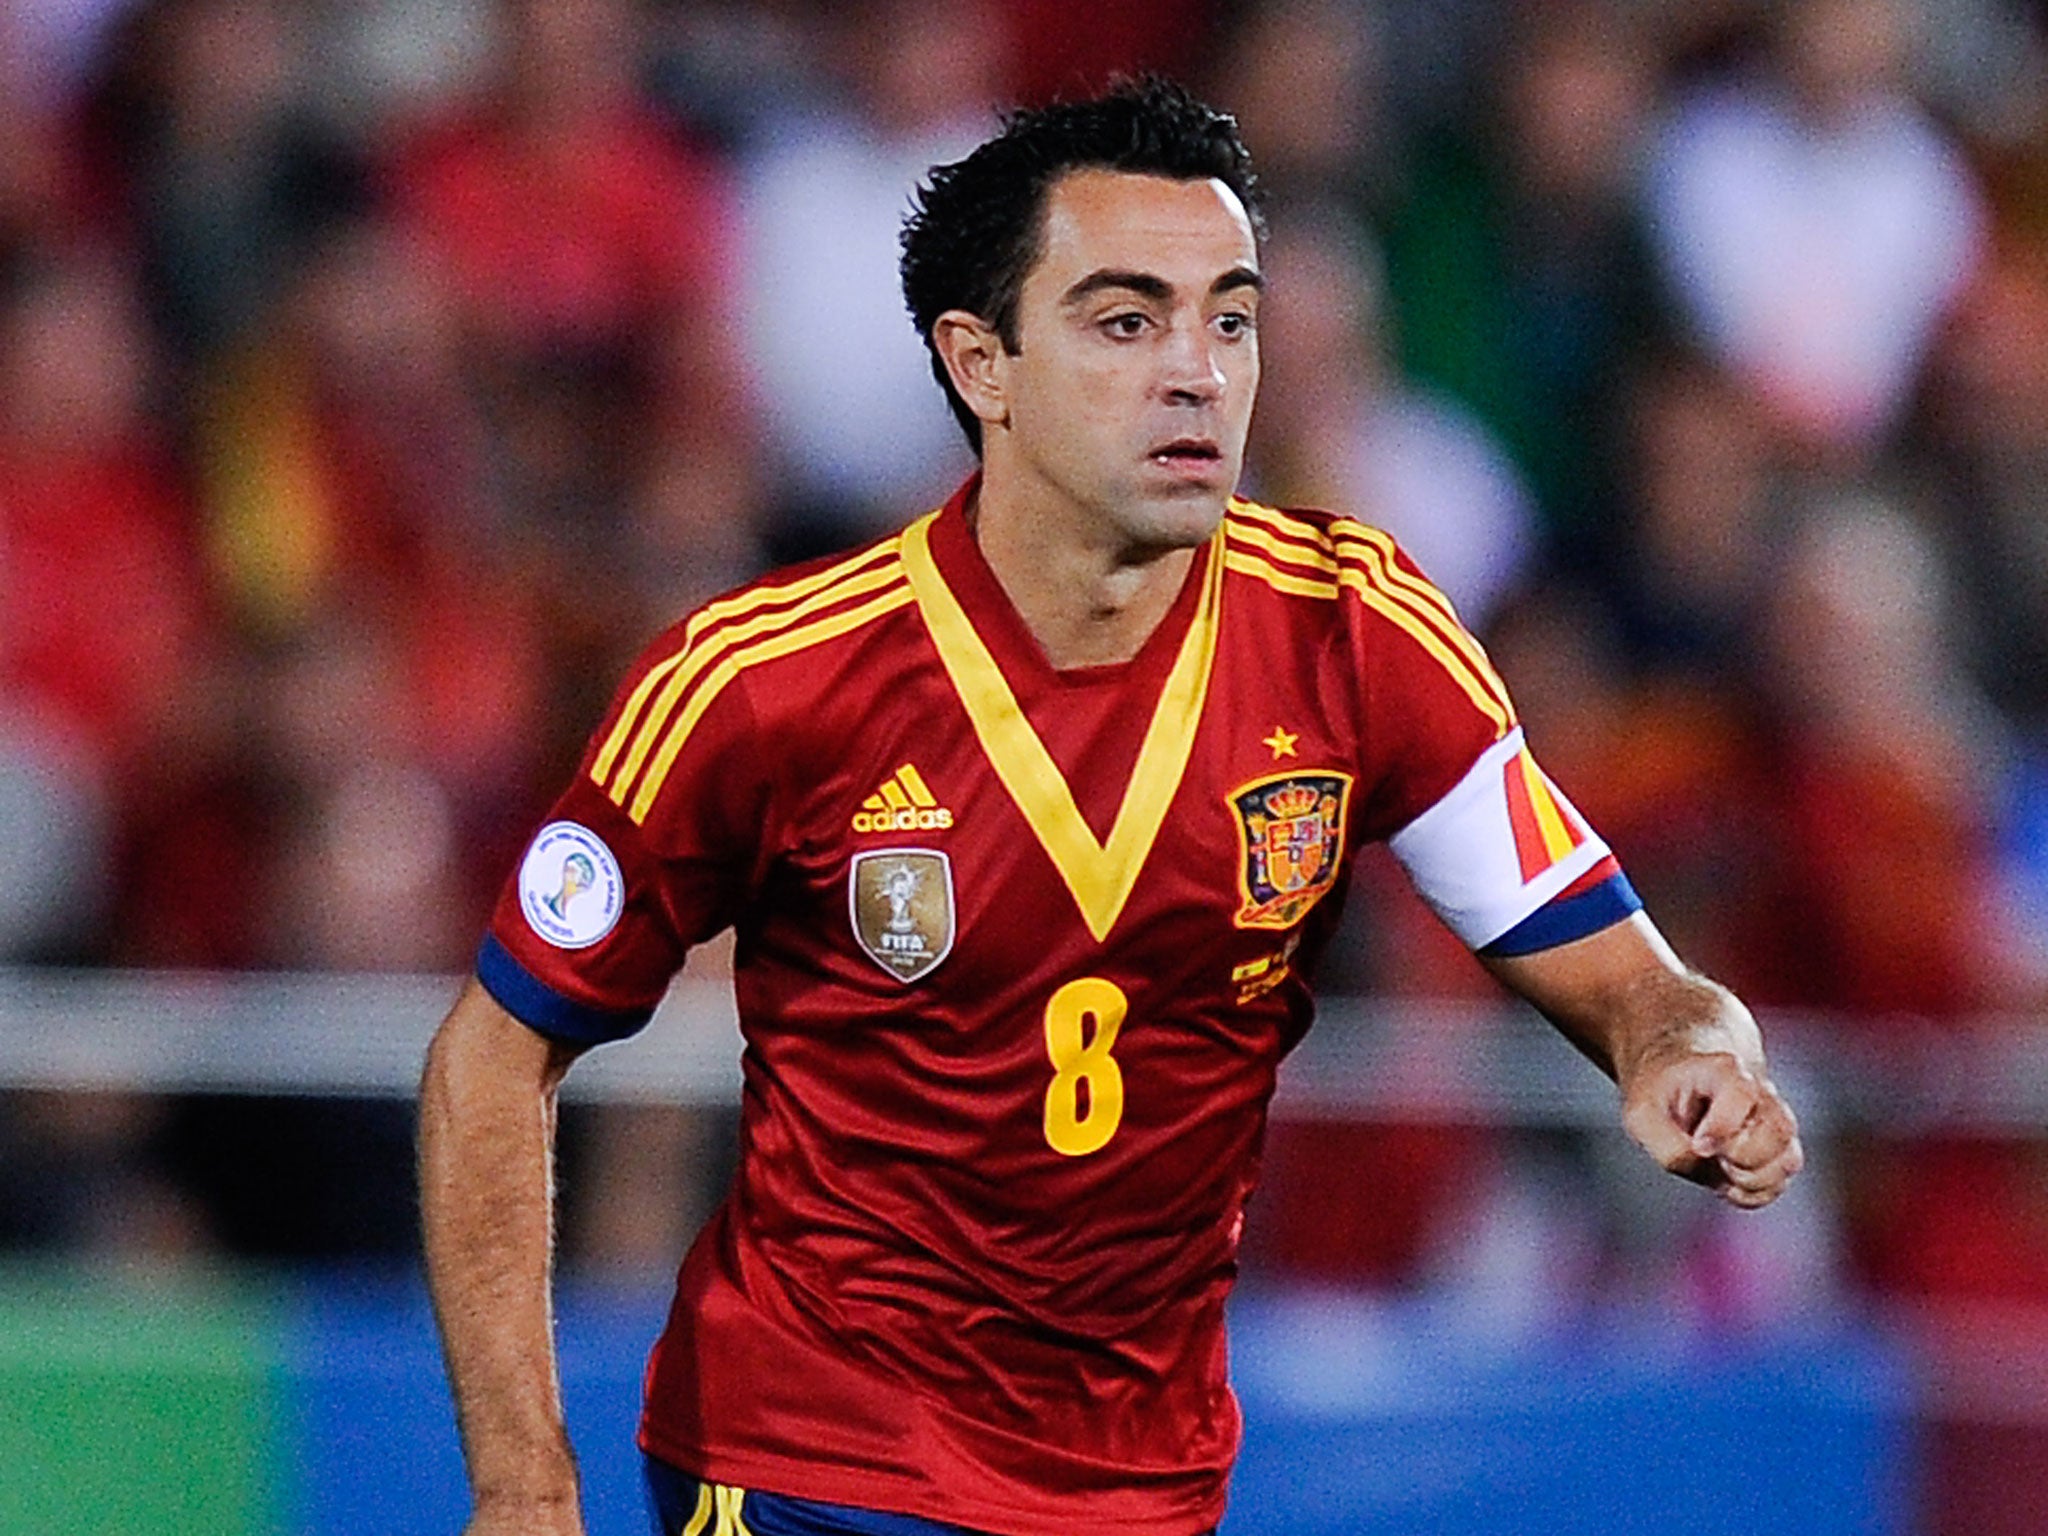 Surely Xavi will bow out after the tournament